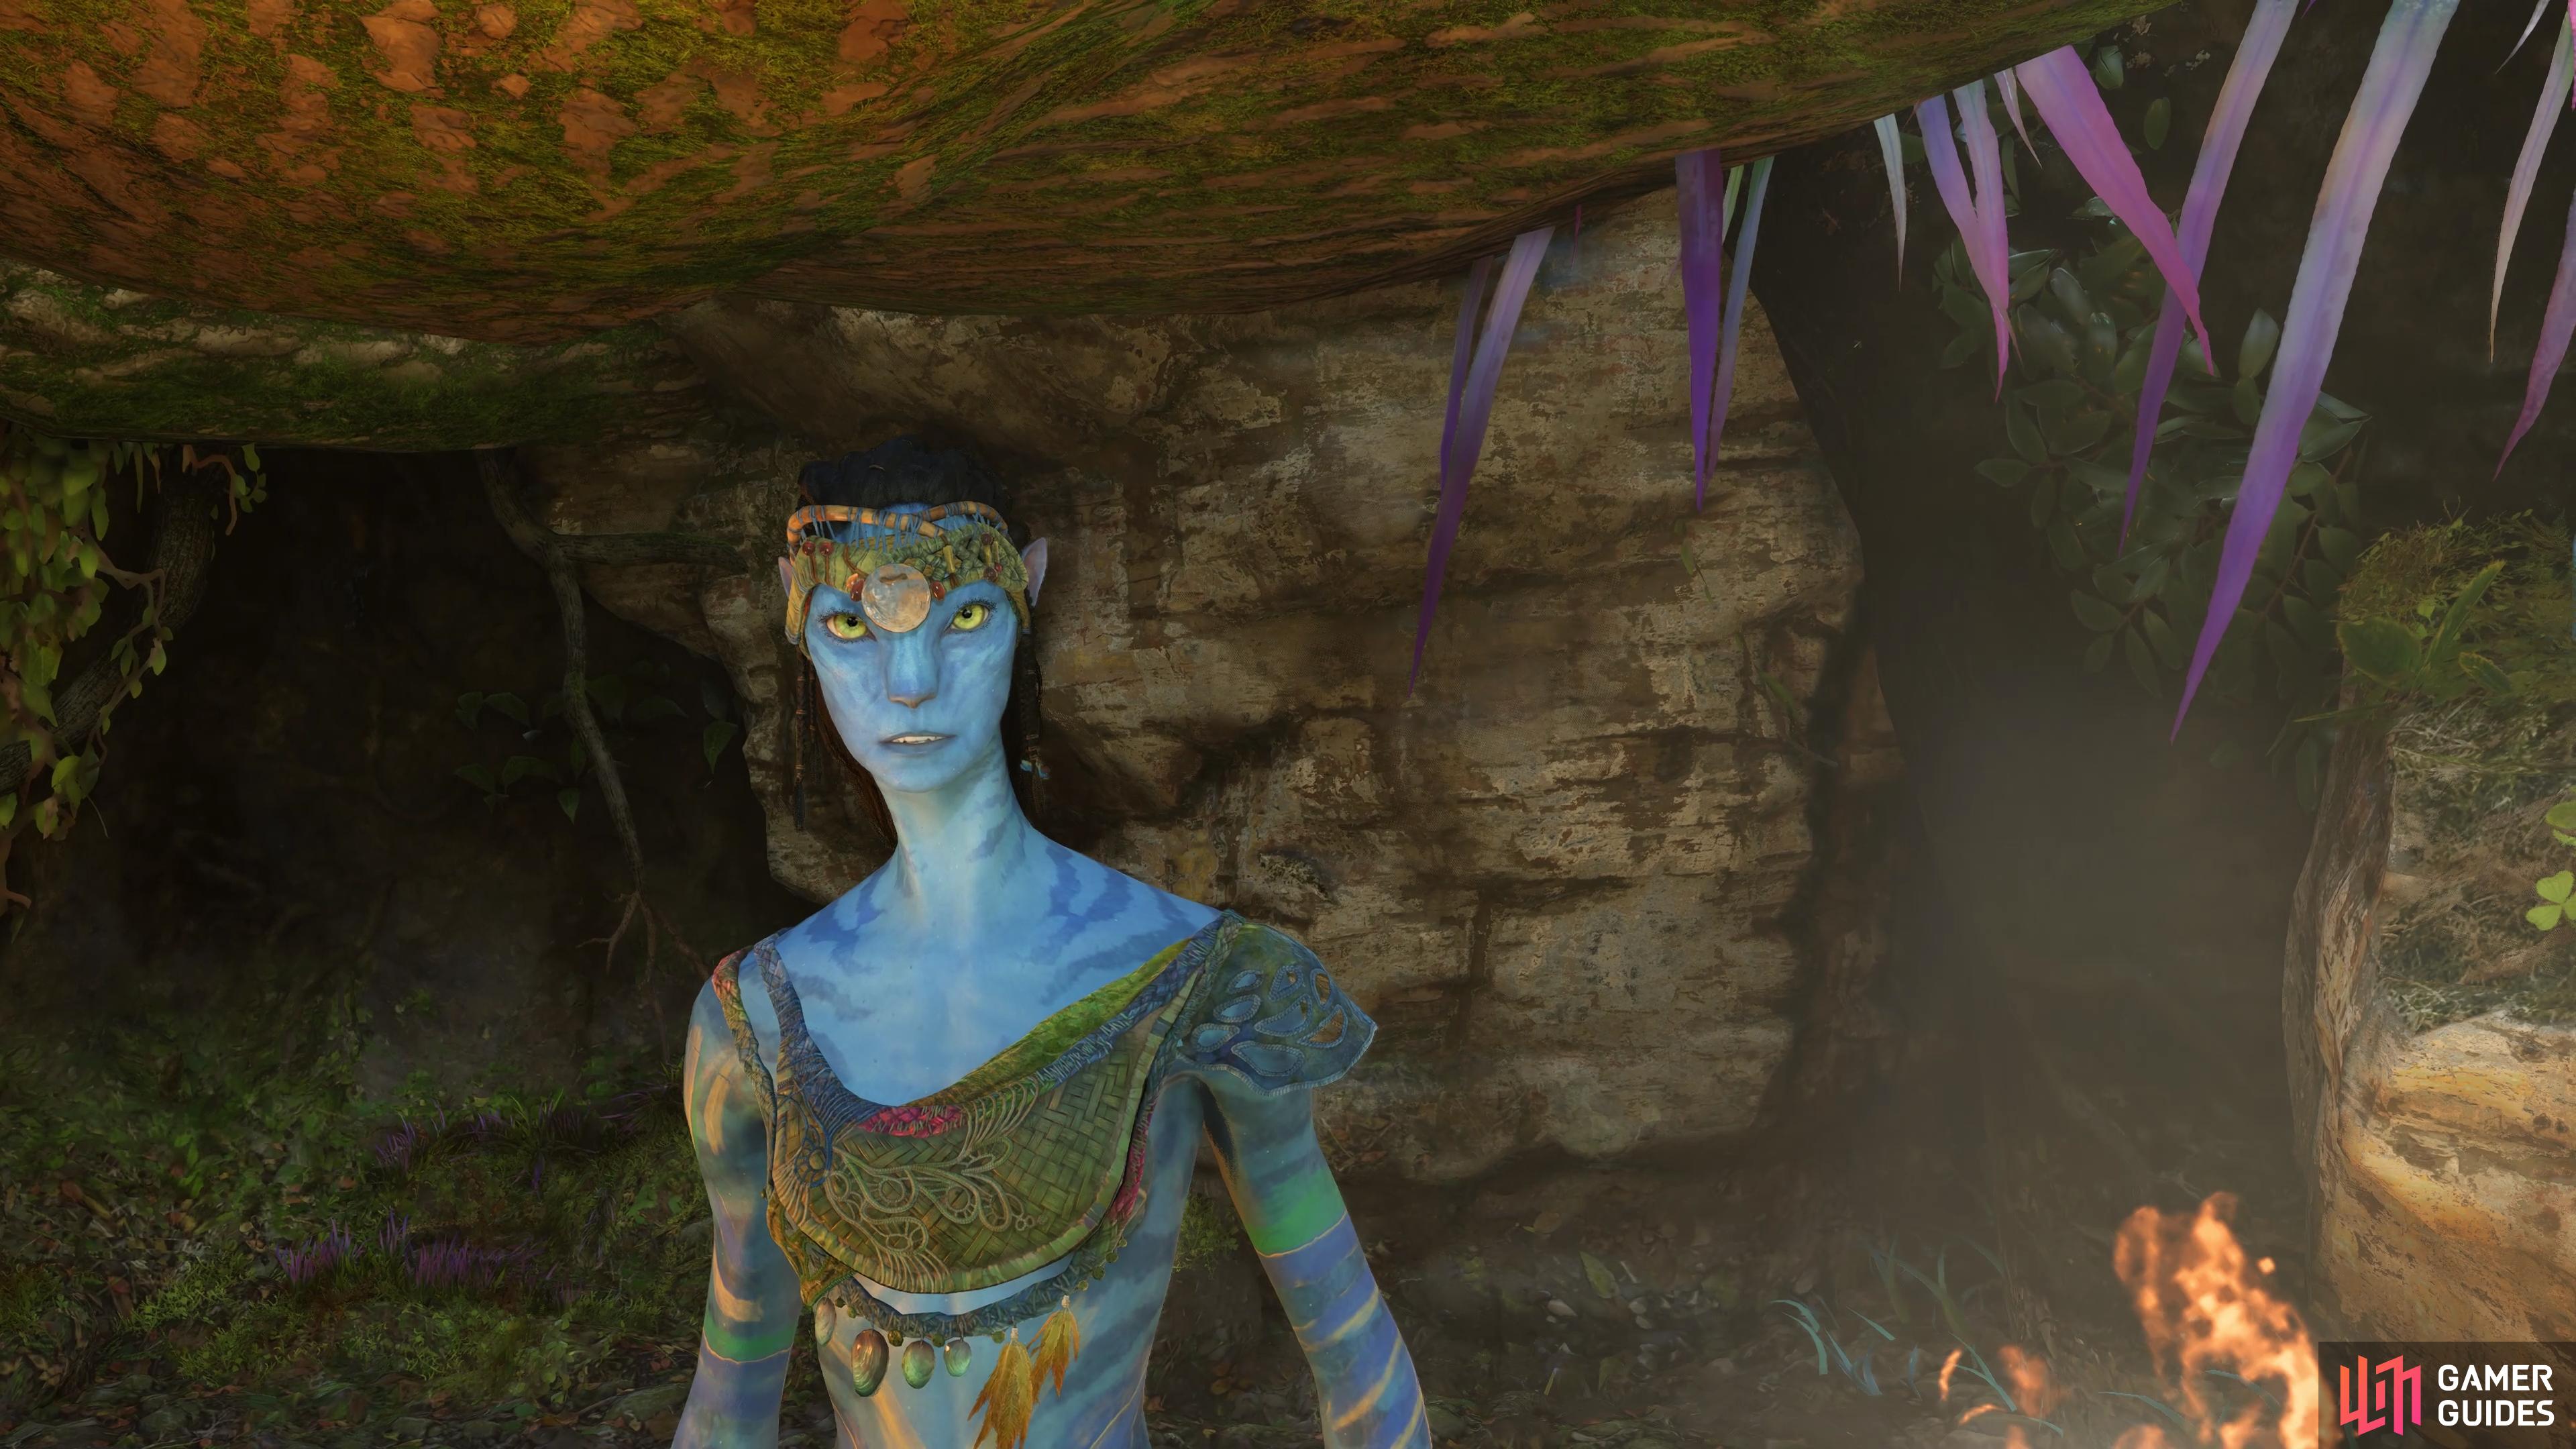 The Gatherer Gone side quest in Avatar: Frontiers of Pandora will task you with finding a Na’vi named Vu’an.